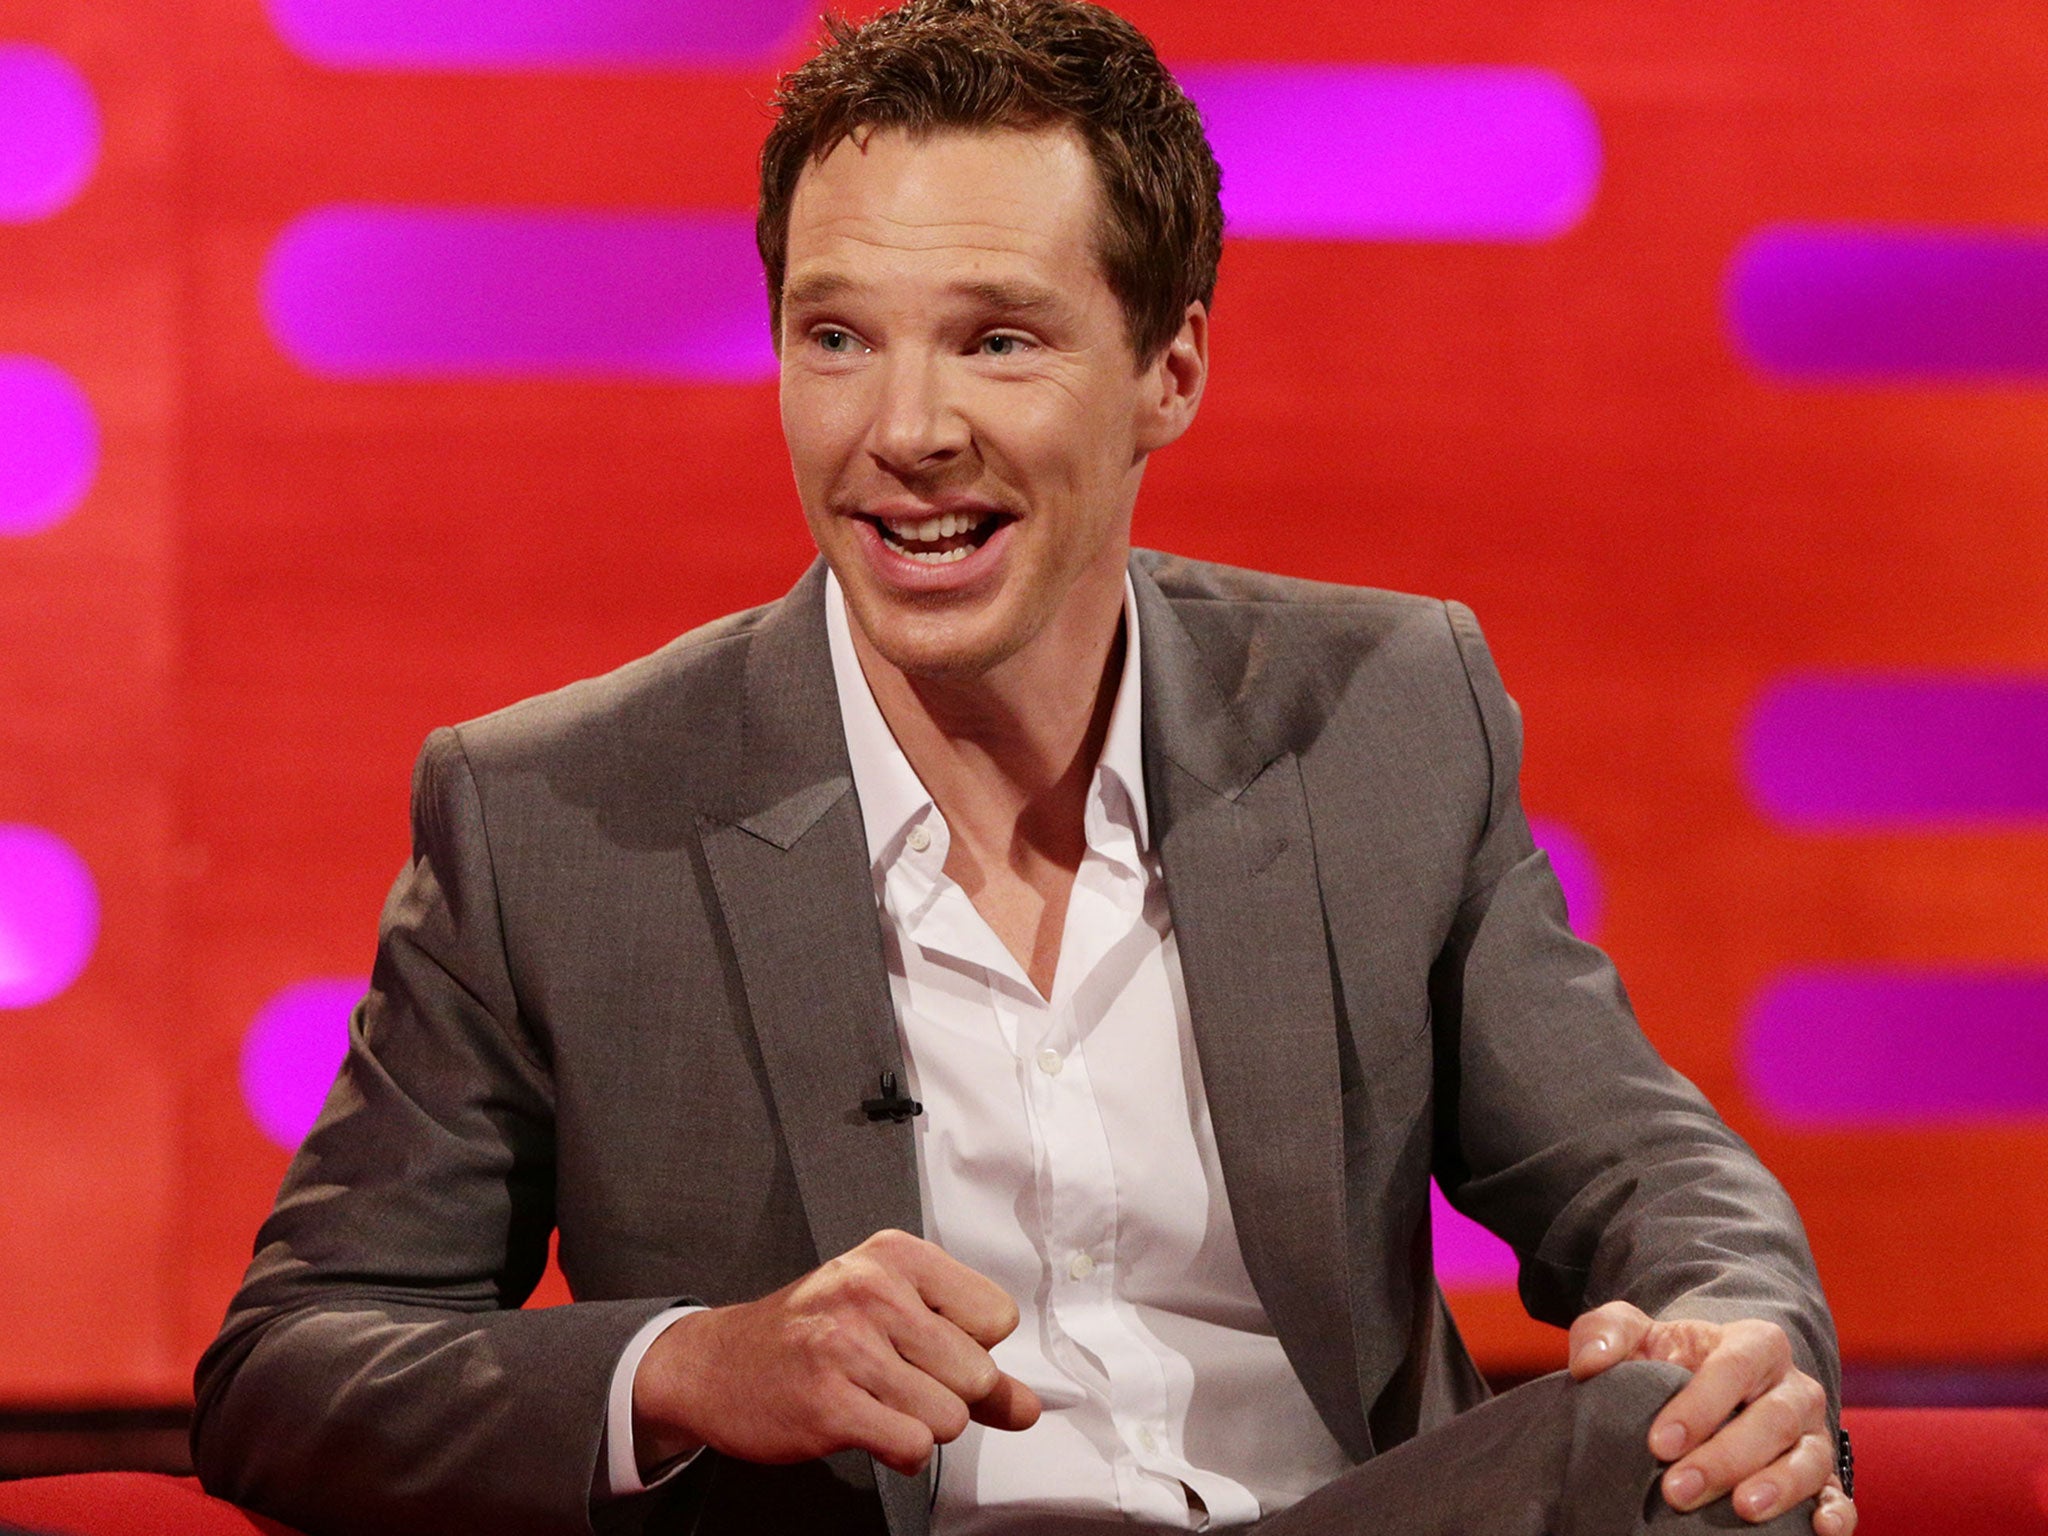 Benedict Cumberbatch has refused to deny his involvement in the upcoming new Star Wars film